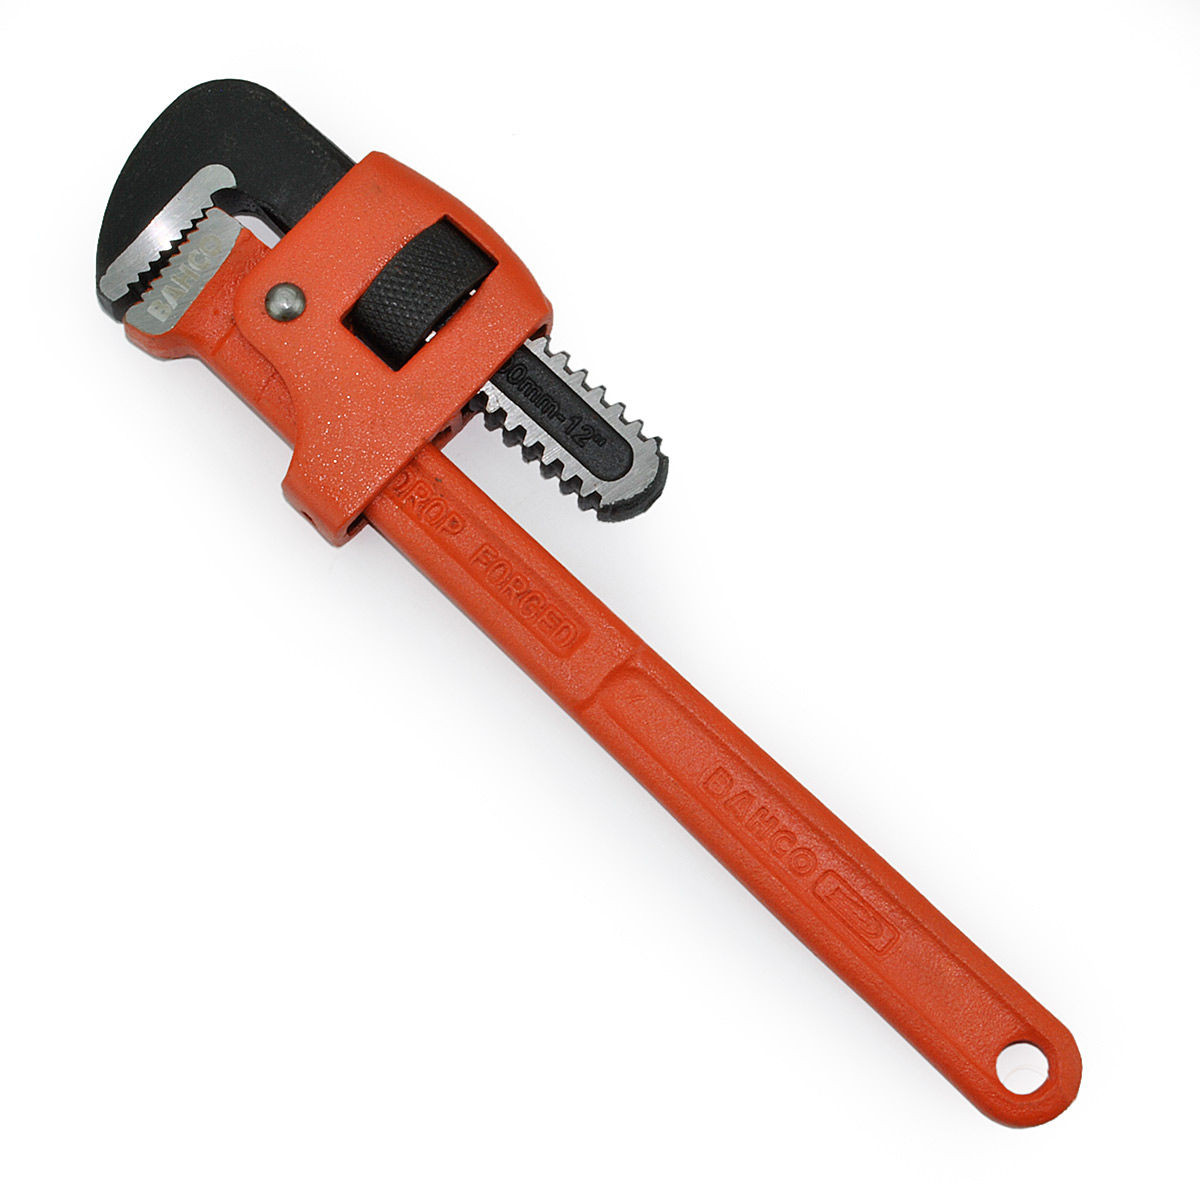 Monkey Wrench  Origin and Meaning